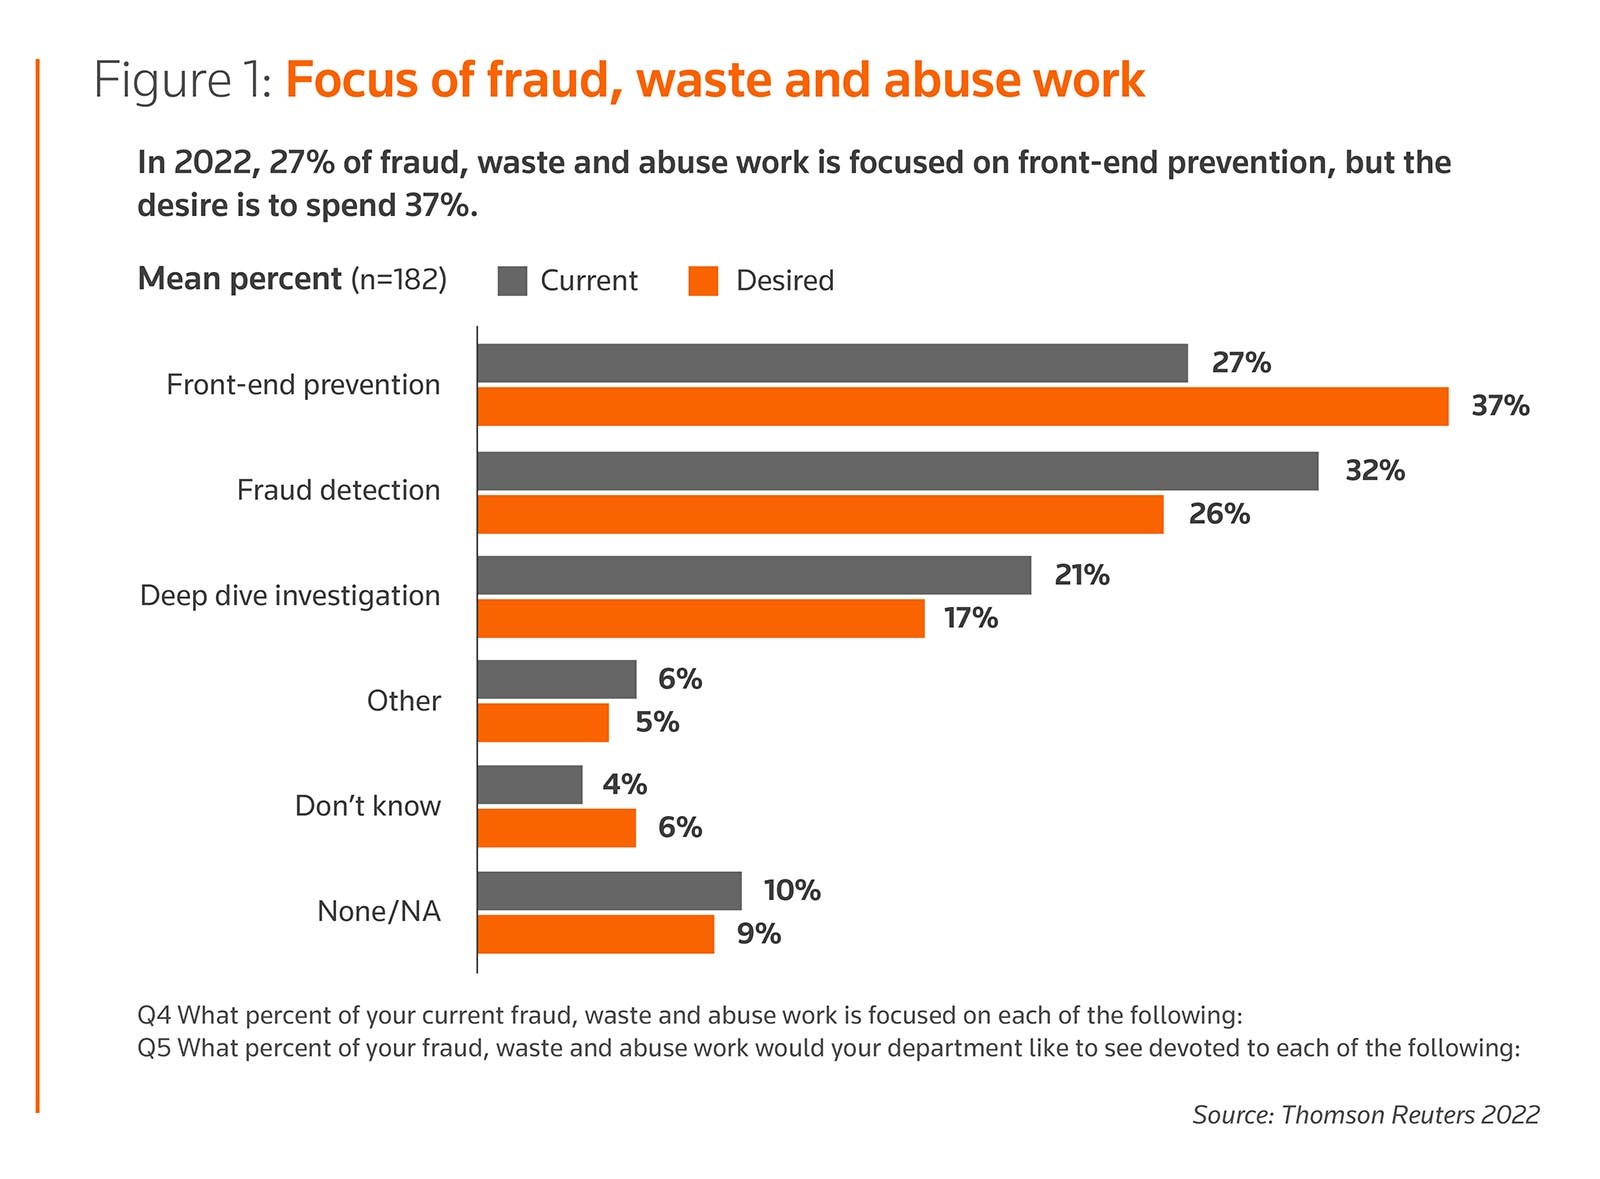 Focus of fraud, waste and abuse work